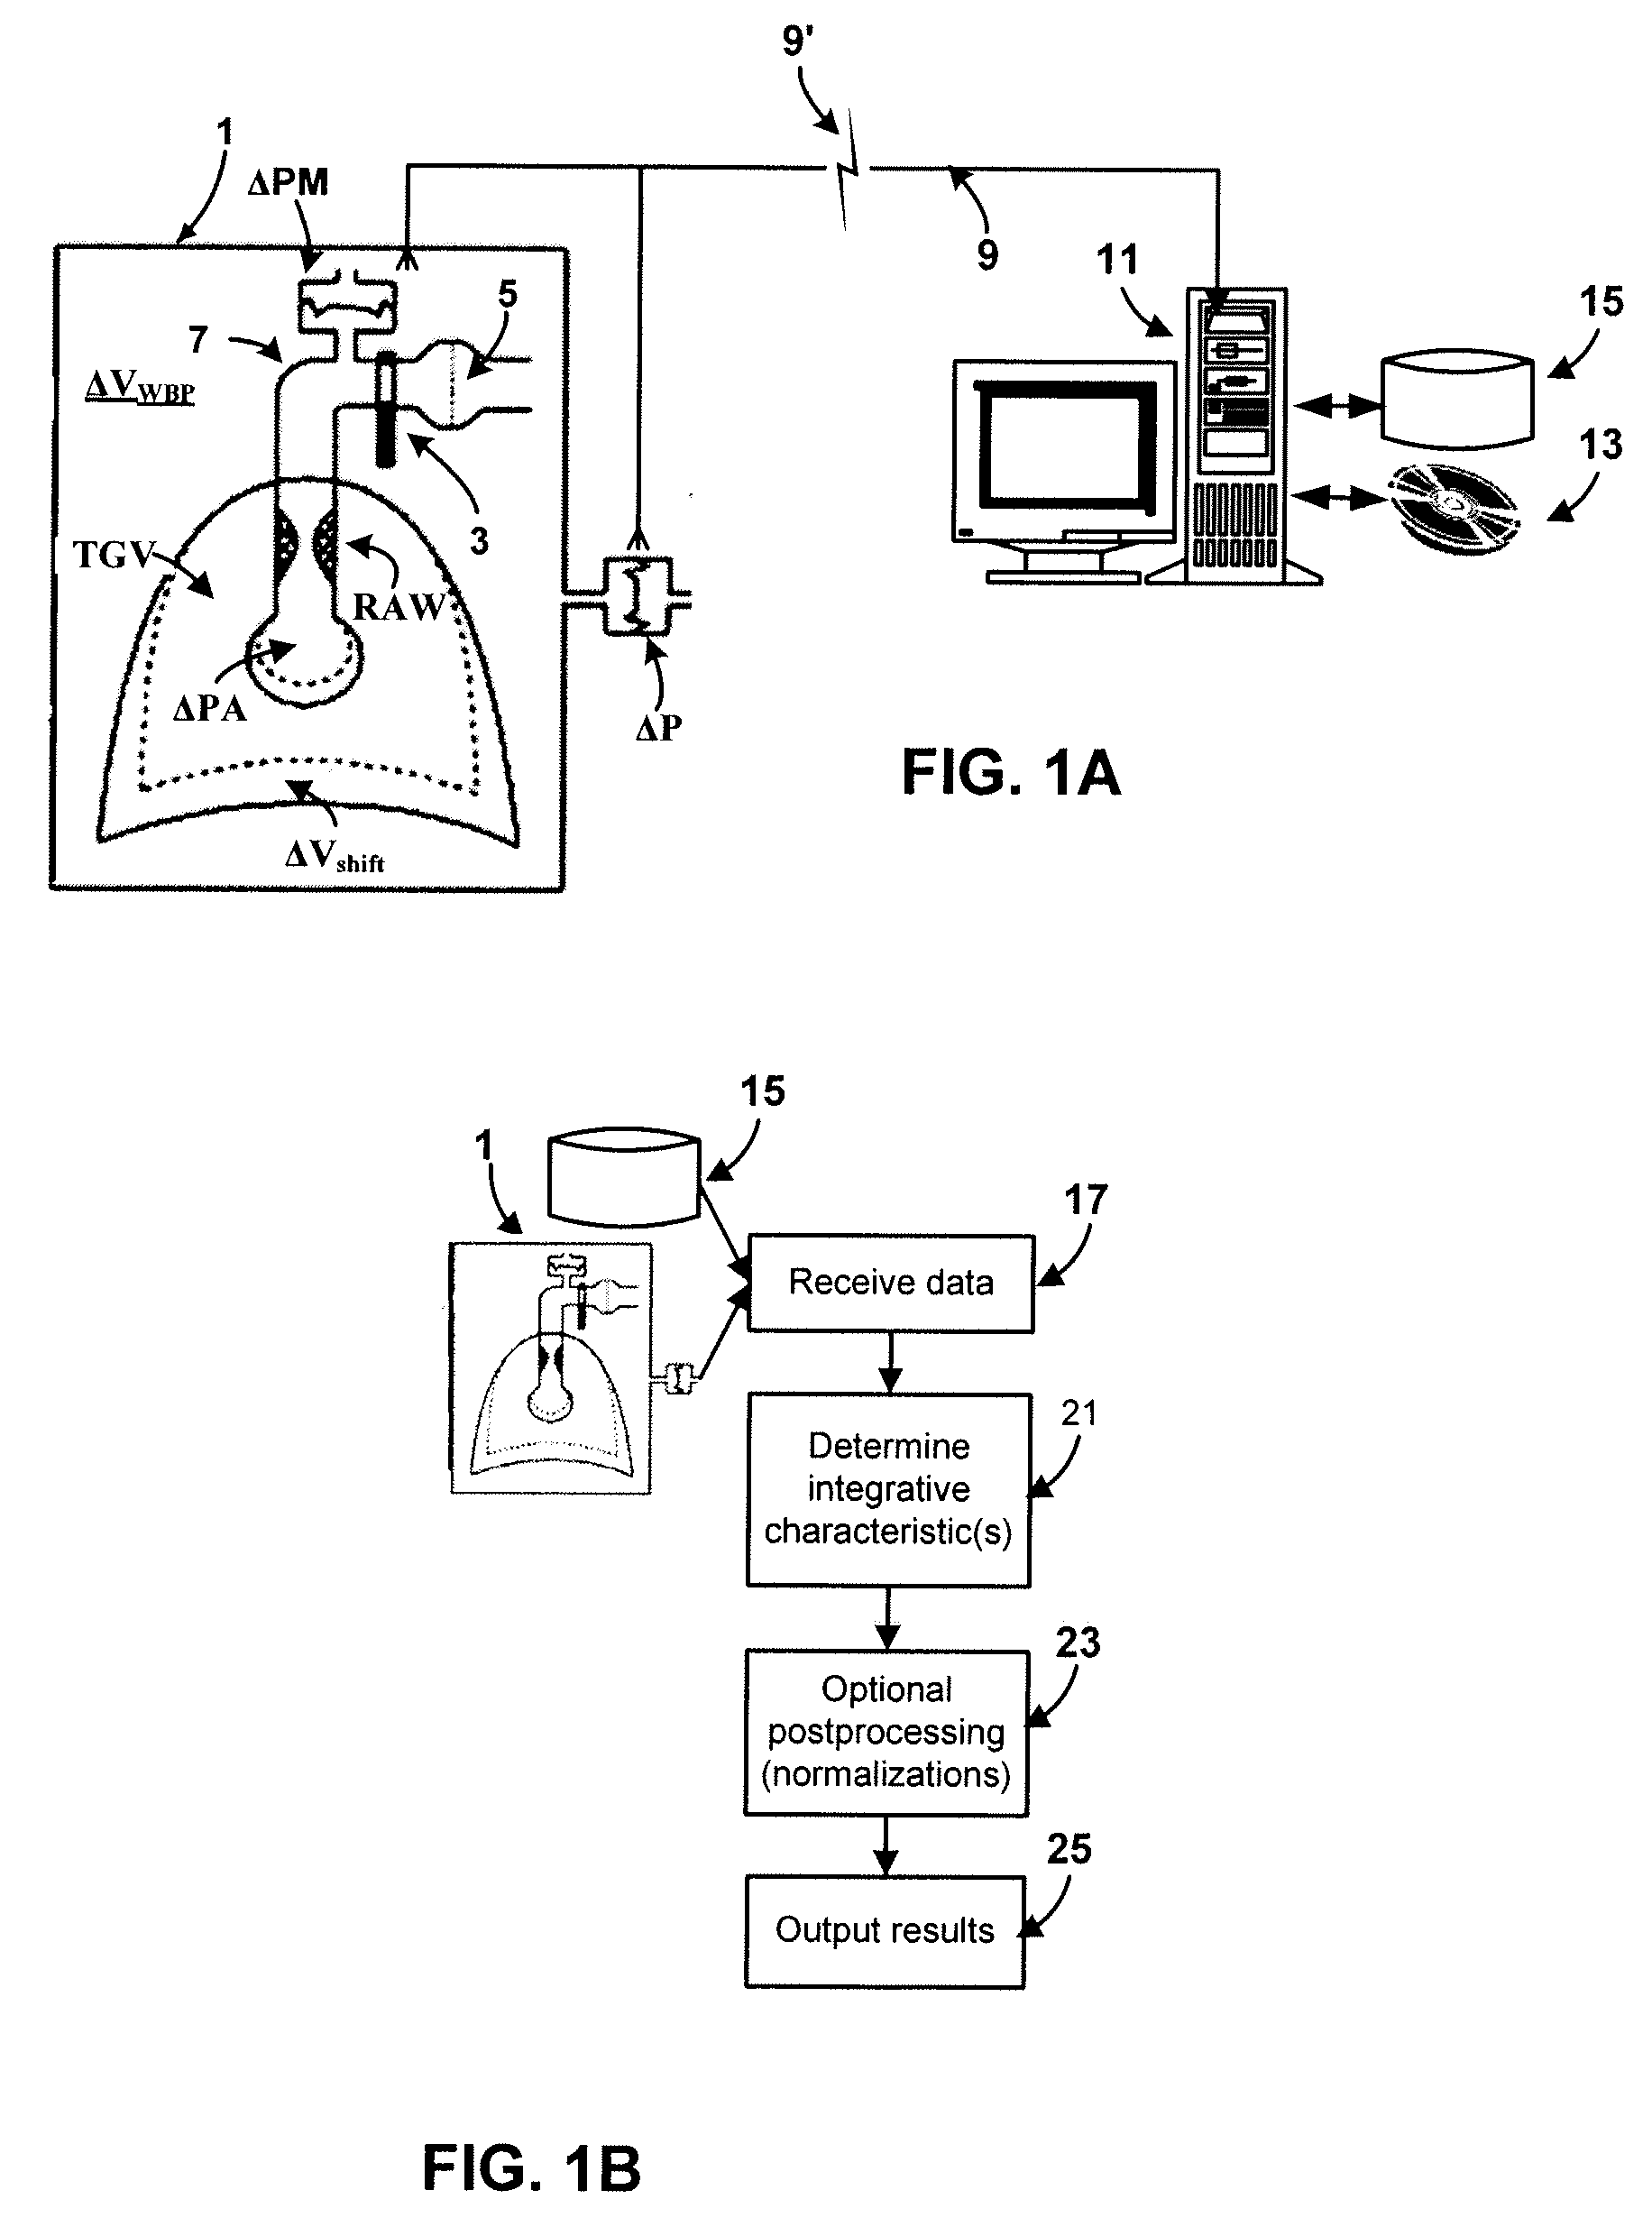 Systems and methods for processing pulmonary function data